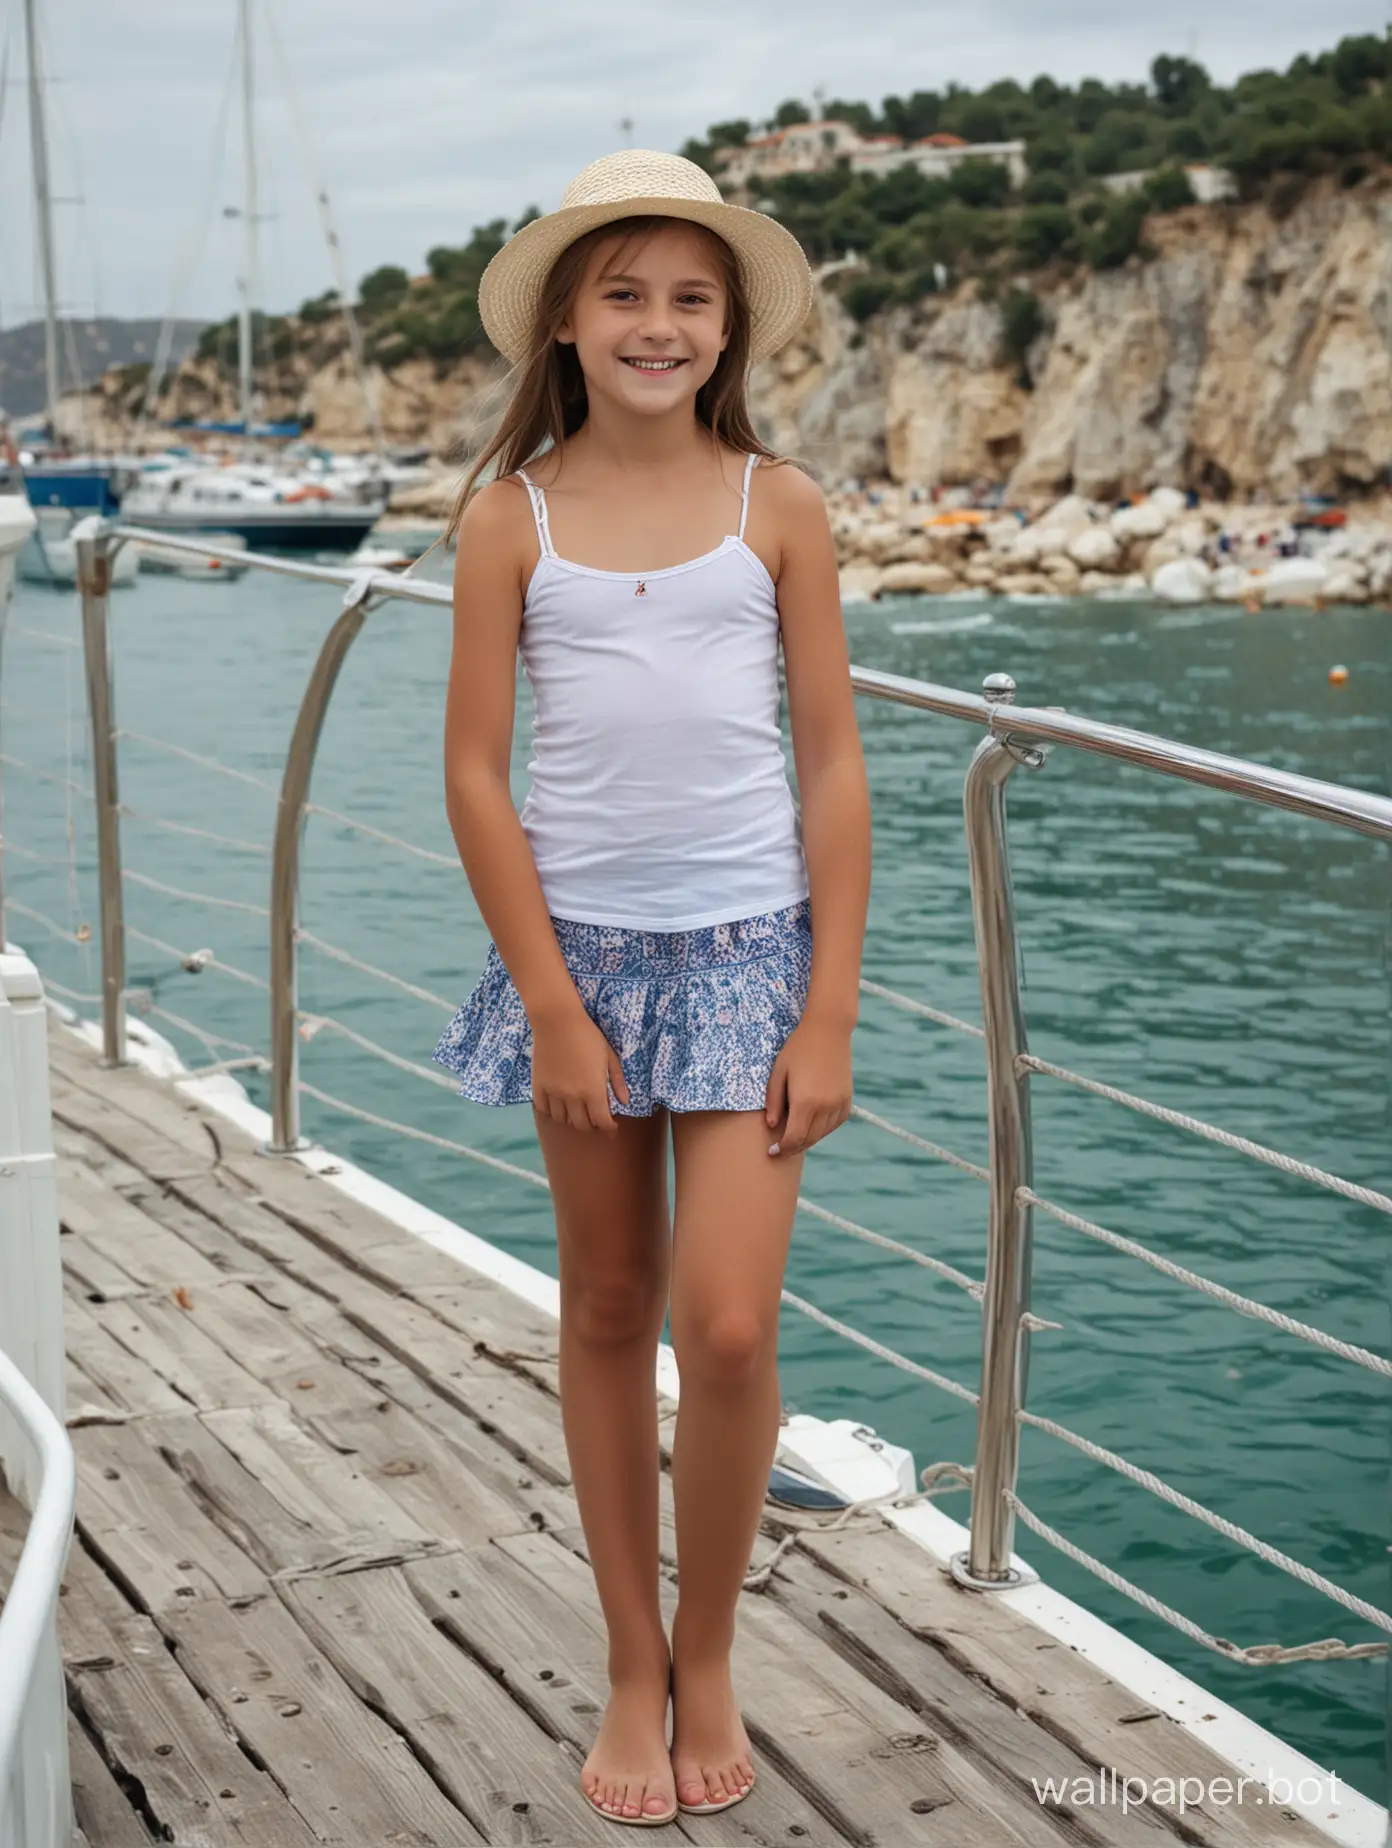 beautiful girl 11 years old, sea, Crimea, short skirt, hat, full height, smile, posing, yacht, people, topless